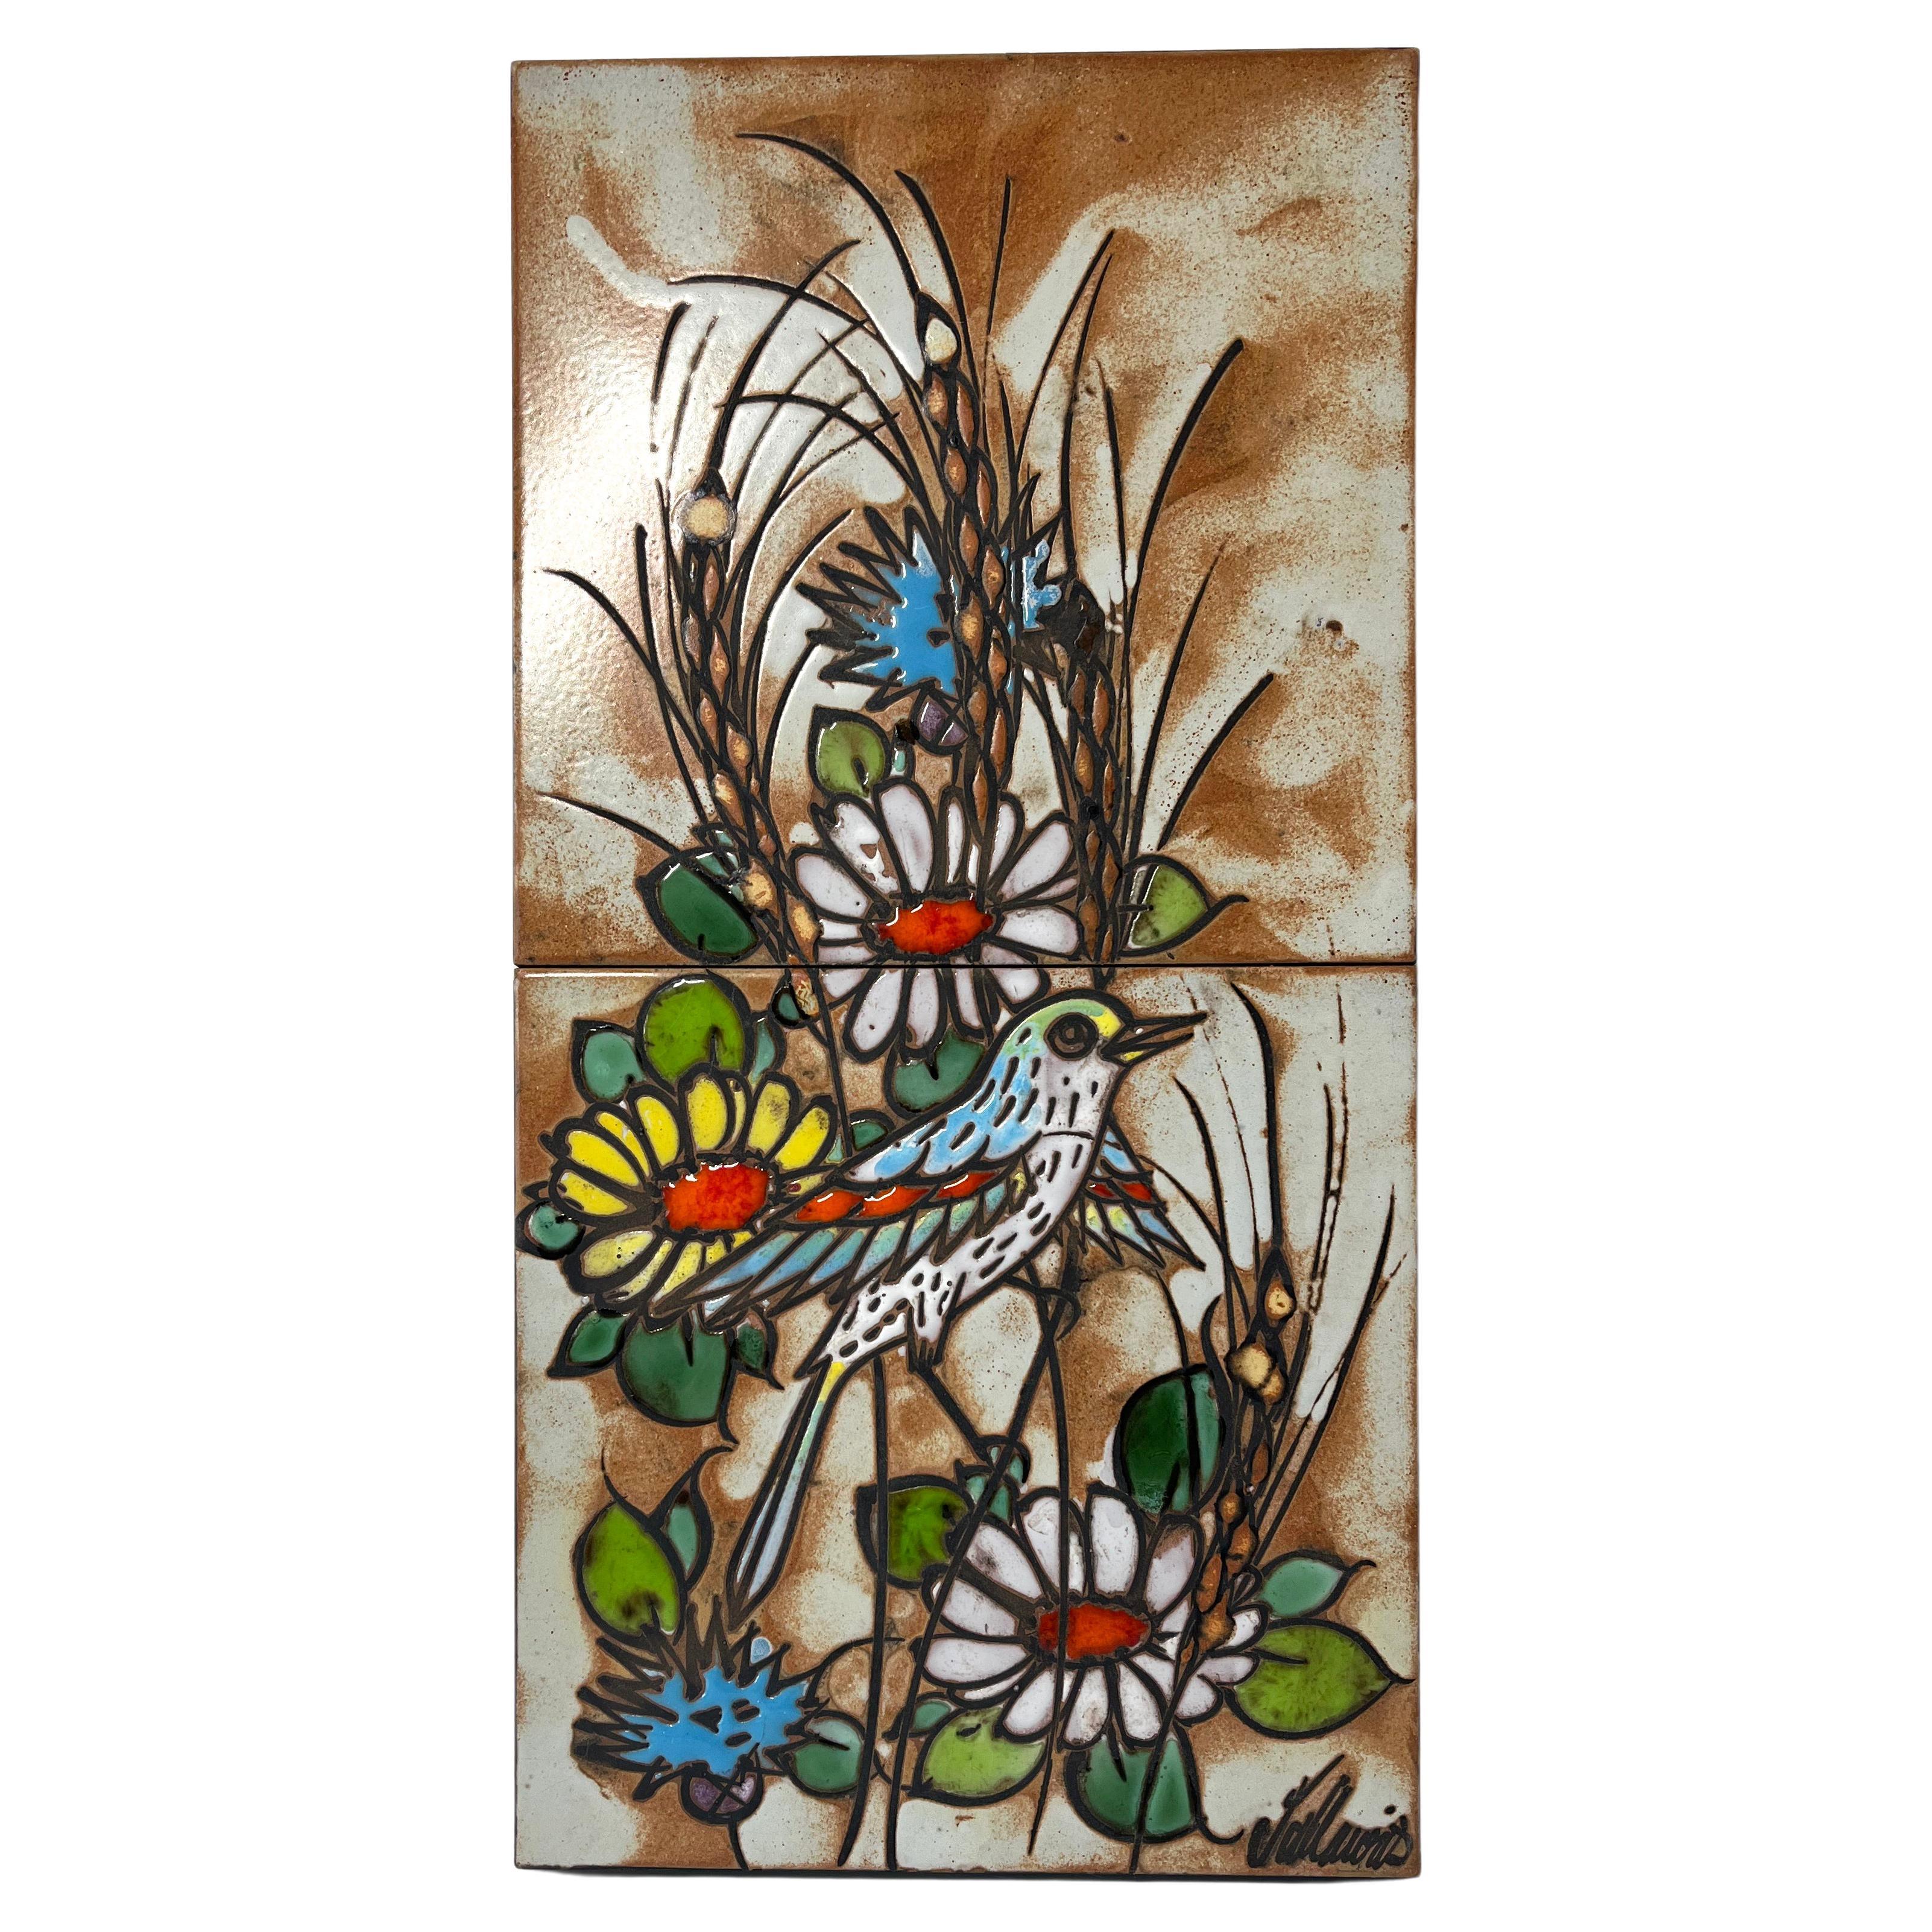 Songbird and Daisies Vallauris Glazed Ceramic Tiles Enamel Wall Decoration c1960 For Sale